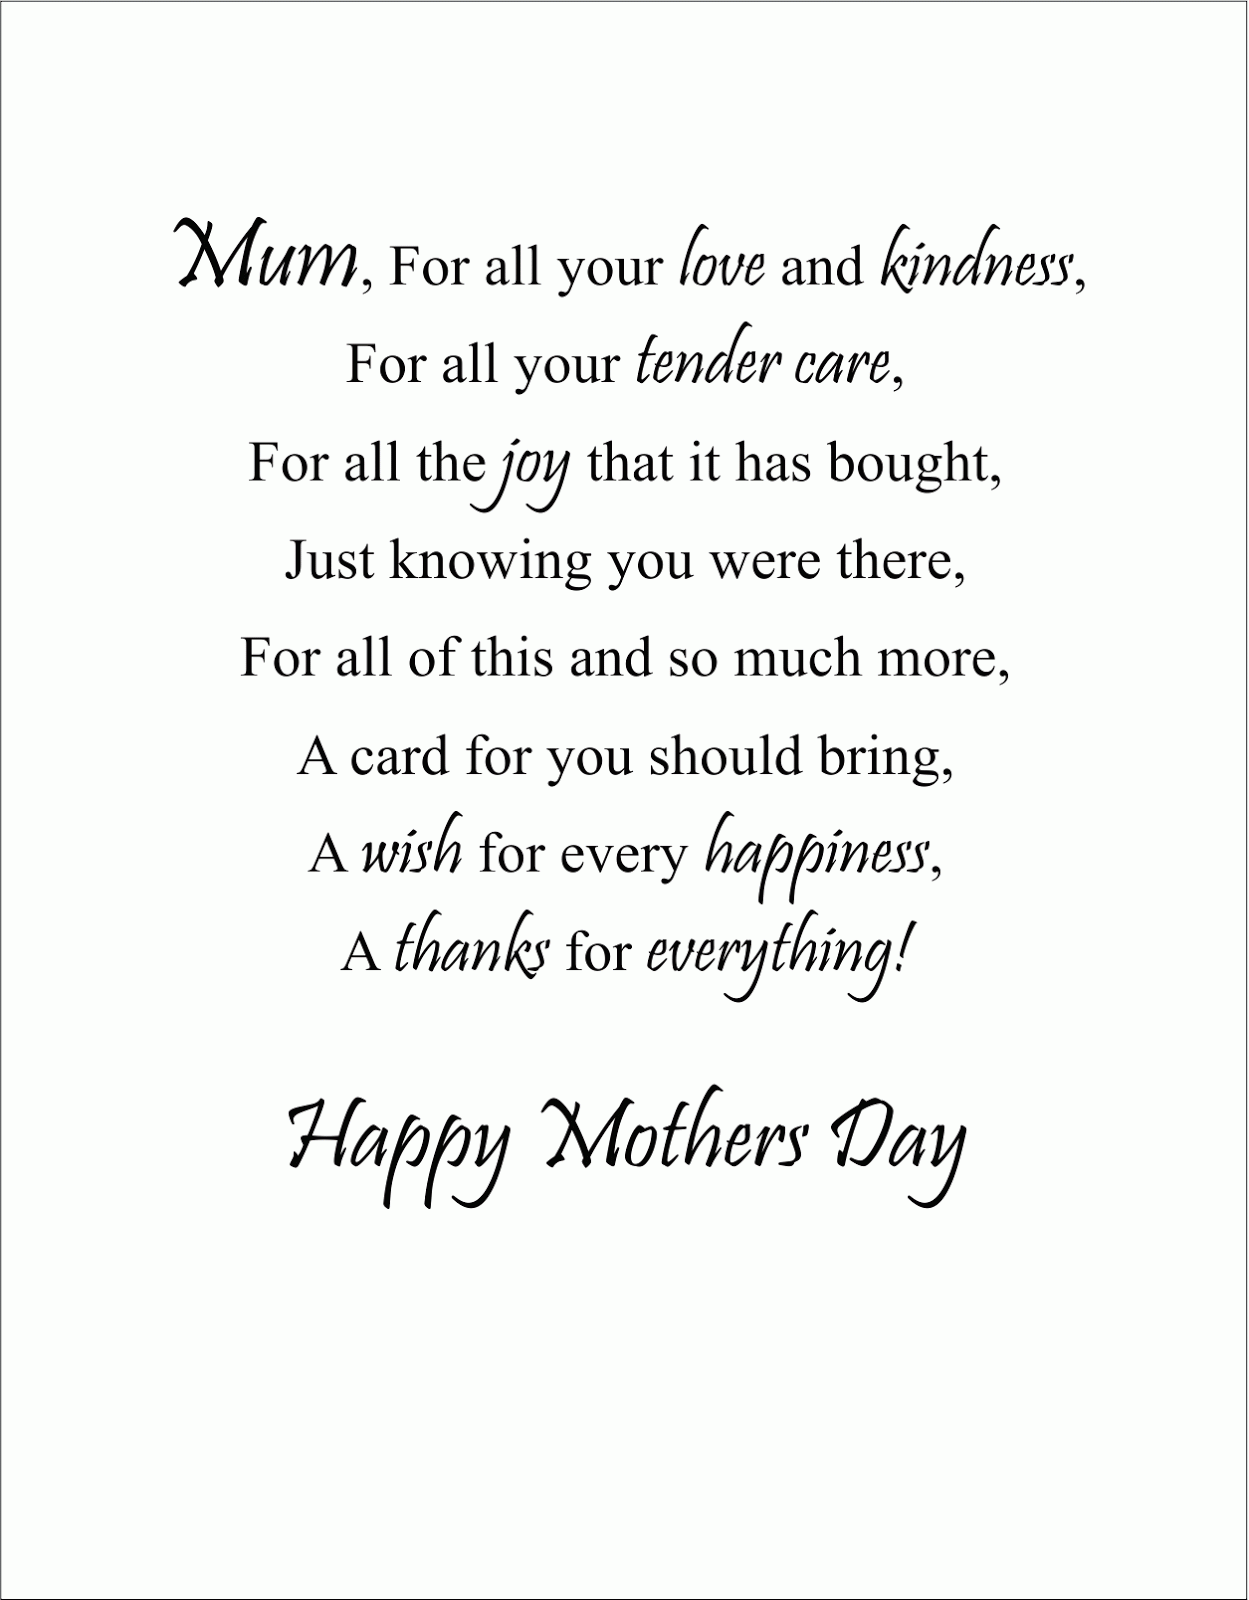 Mother's Day Poems in Graphics Let's Celebrate!